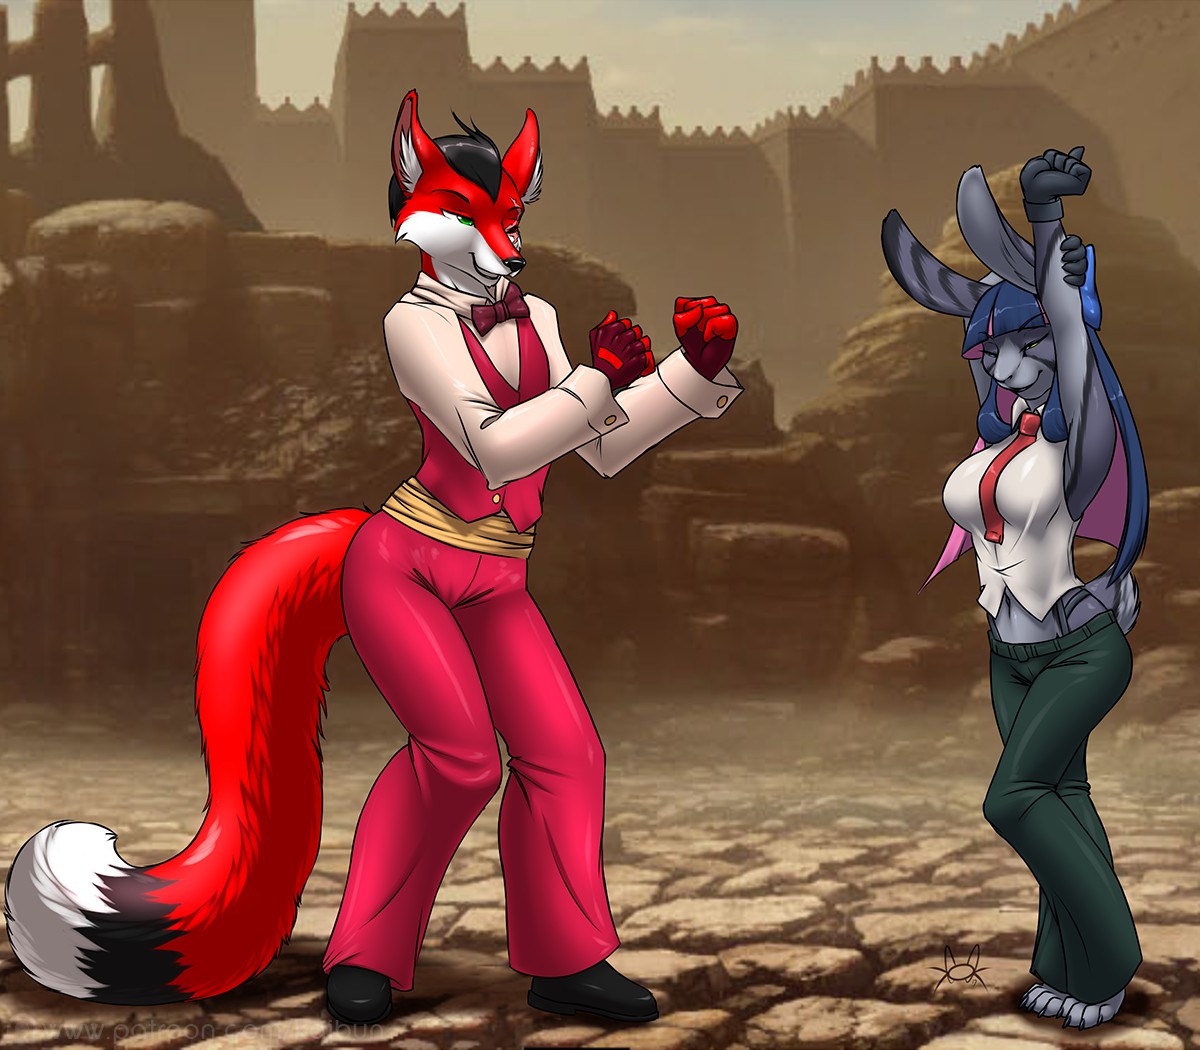 Daleon Furball Character King King Of Fighters Vanessa King Of Fighters By Furball Artis